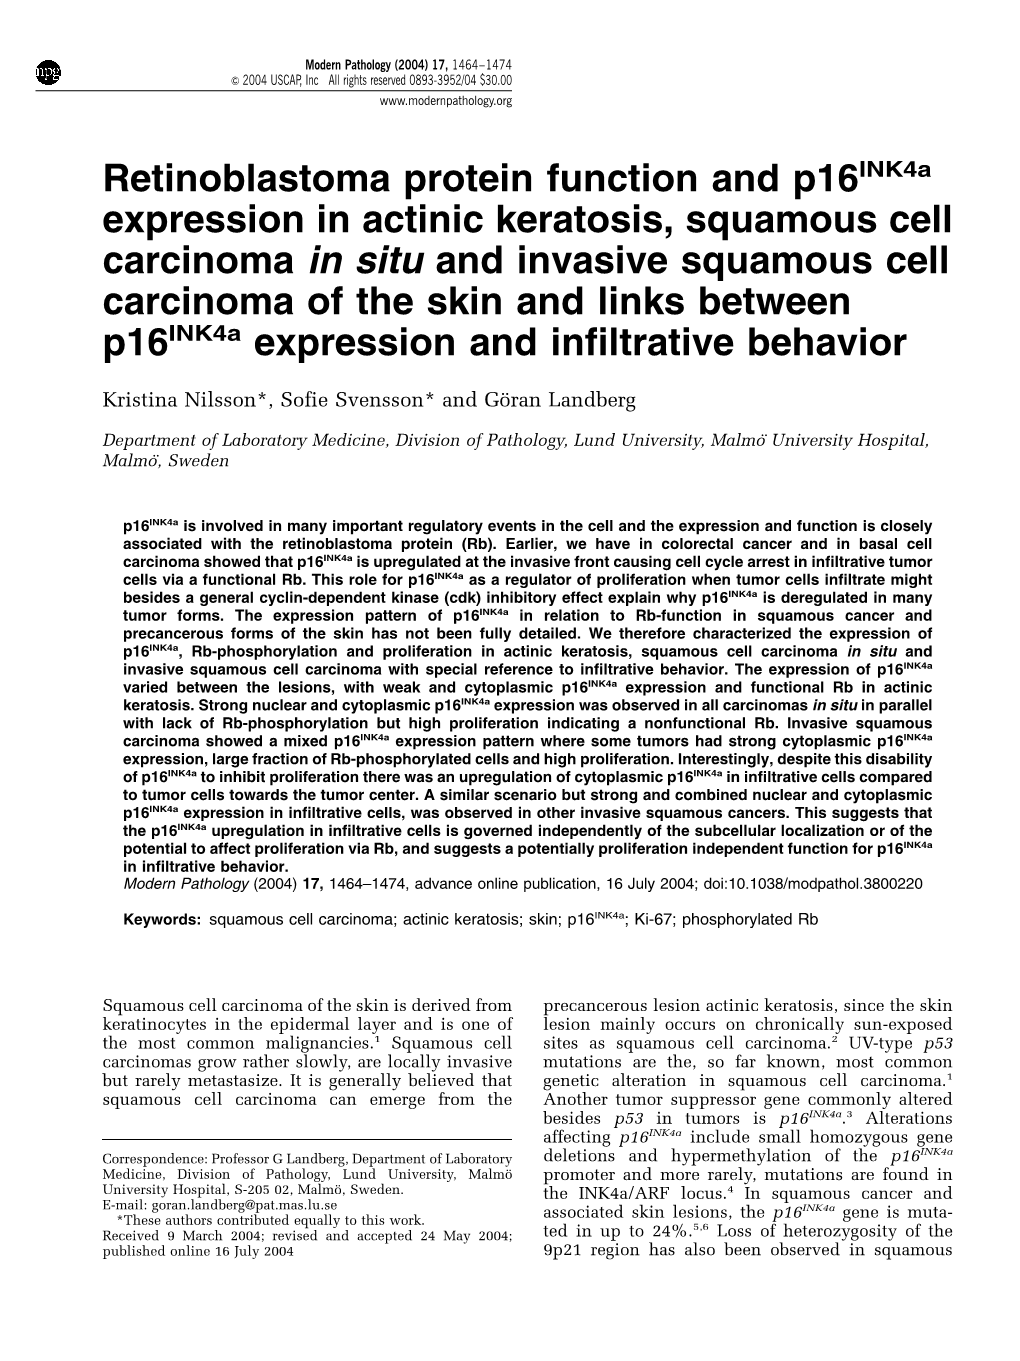 Retinoblastoma Protein Function and P16ink4a Expression in Actinic